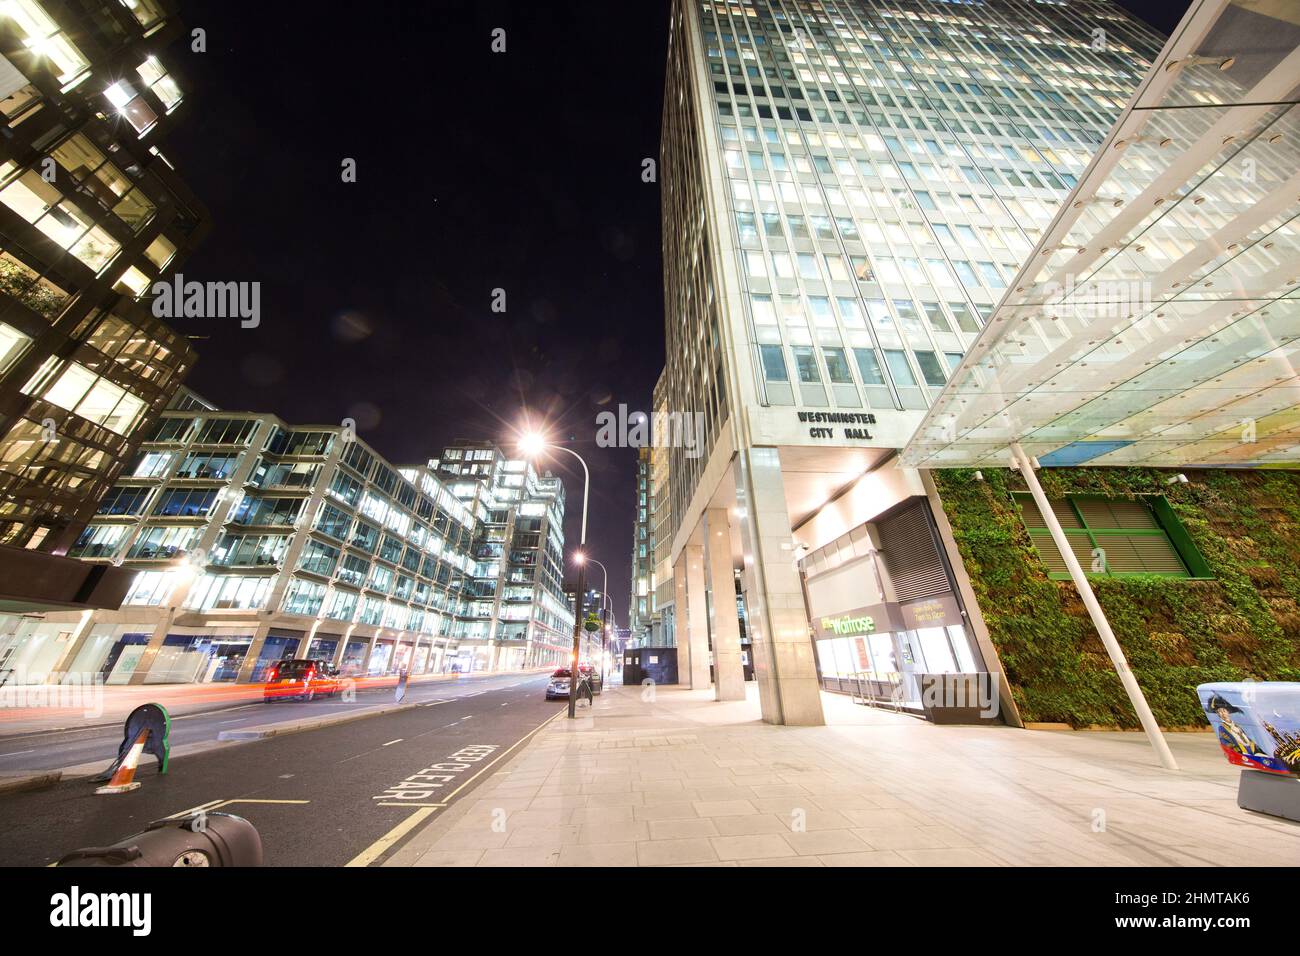 WESTMINSTER CITY HALL Yaitrose Cp doy 7am a 0om Foto Stock